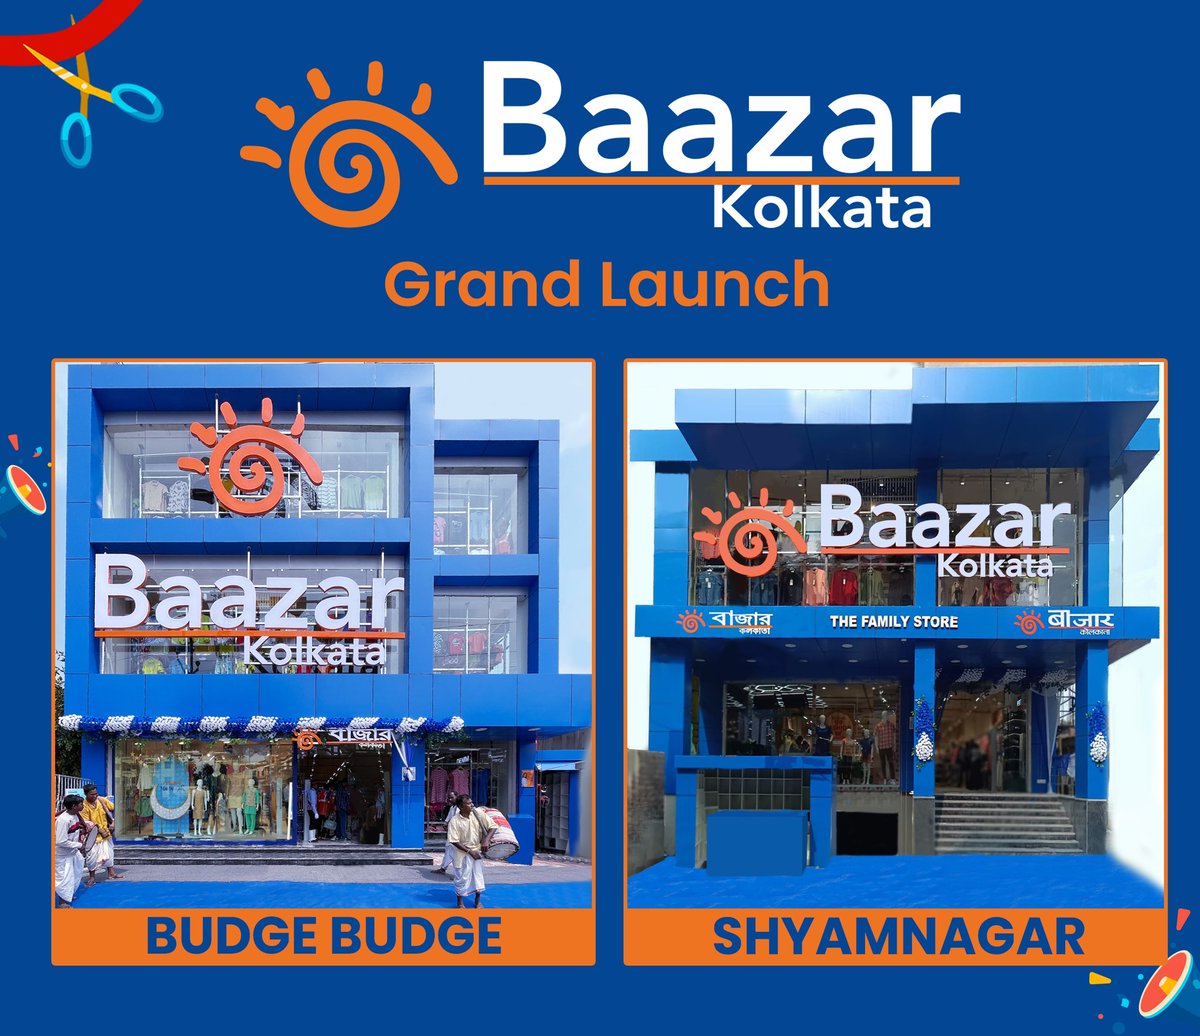 Baazar Kolkata is ecstatic to announce the launch of our store in Budge Budge & Shaymnagar, Kolkata & our 82nd & 83rd Stores in West Bengal adding incredible depth to our network of 165 stores across Bharat. #BaazarKolkata #storeopening #newstore #newstoreopening #newstorealert